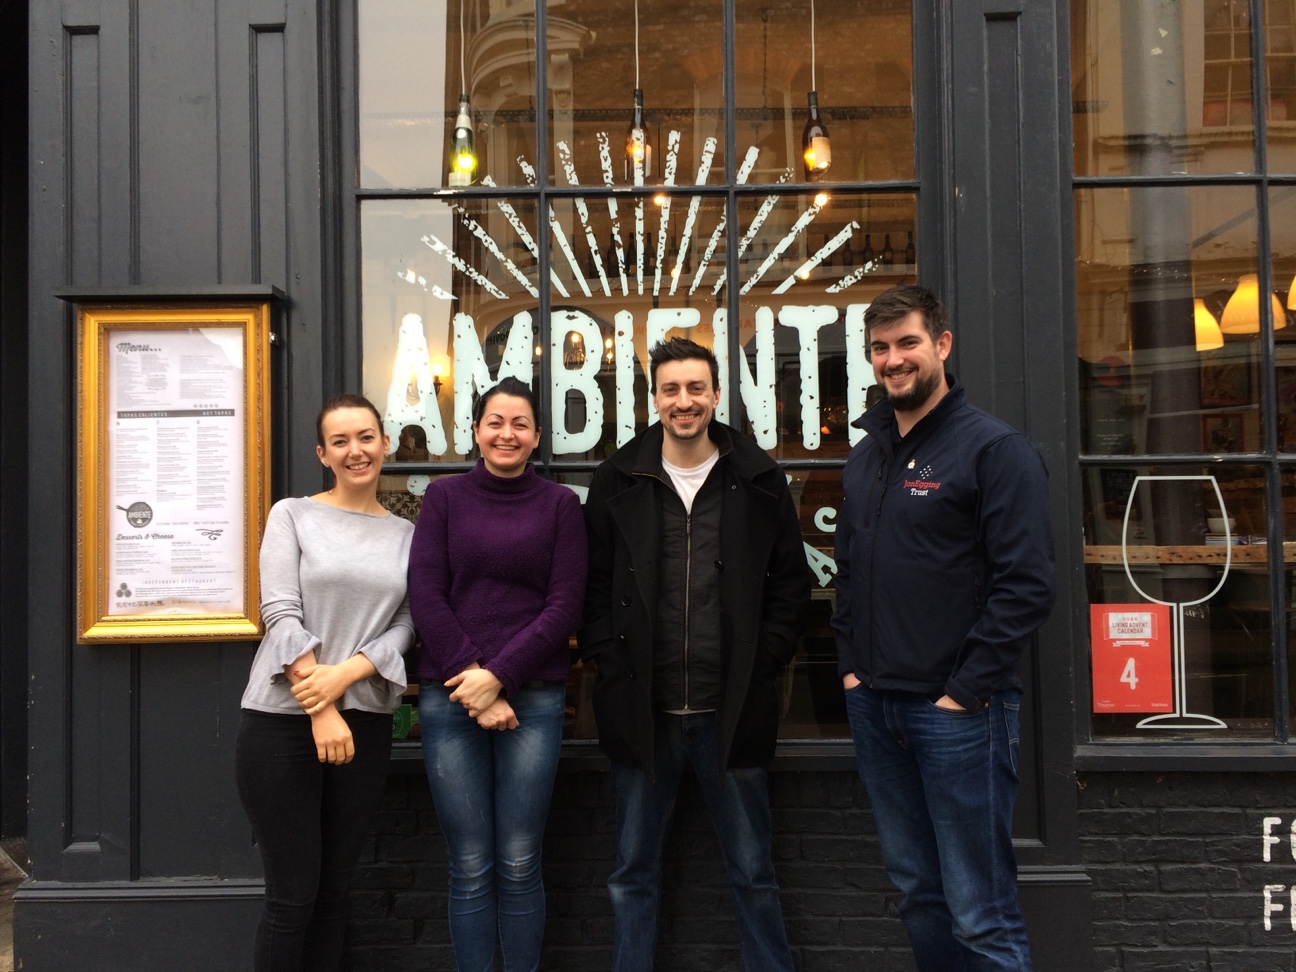 Ambiente Tapas names Jon Egging Trust as its Charity of the Month for February